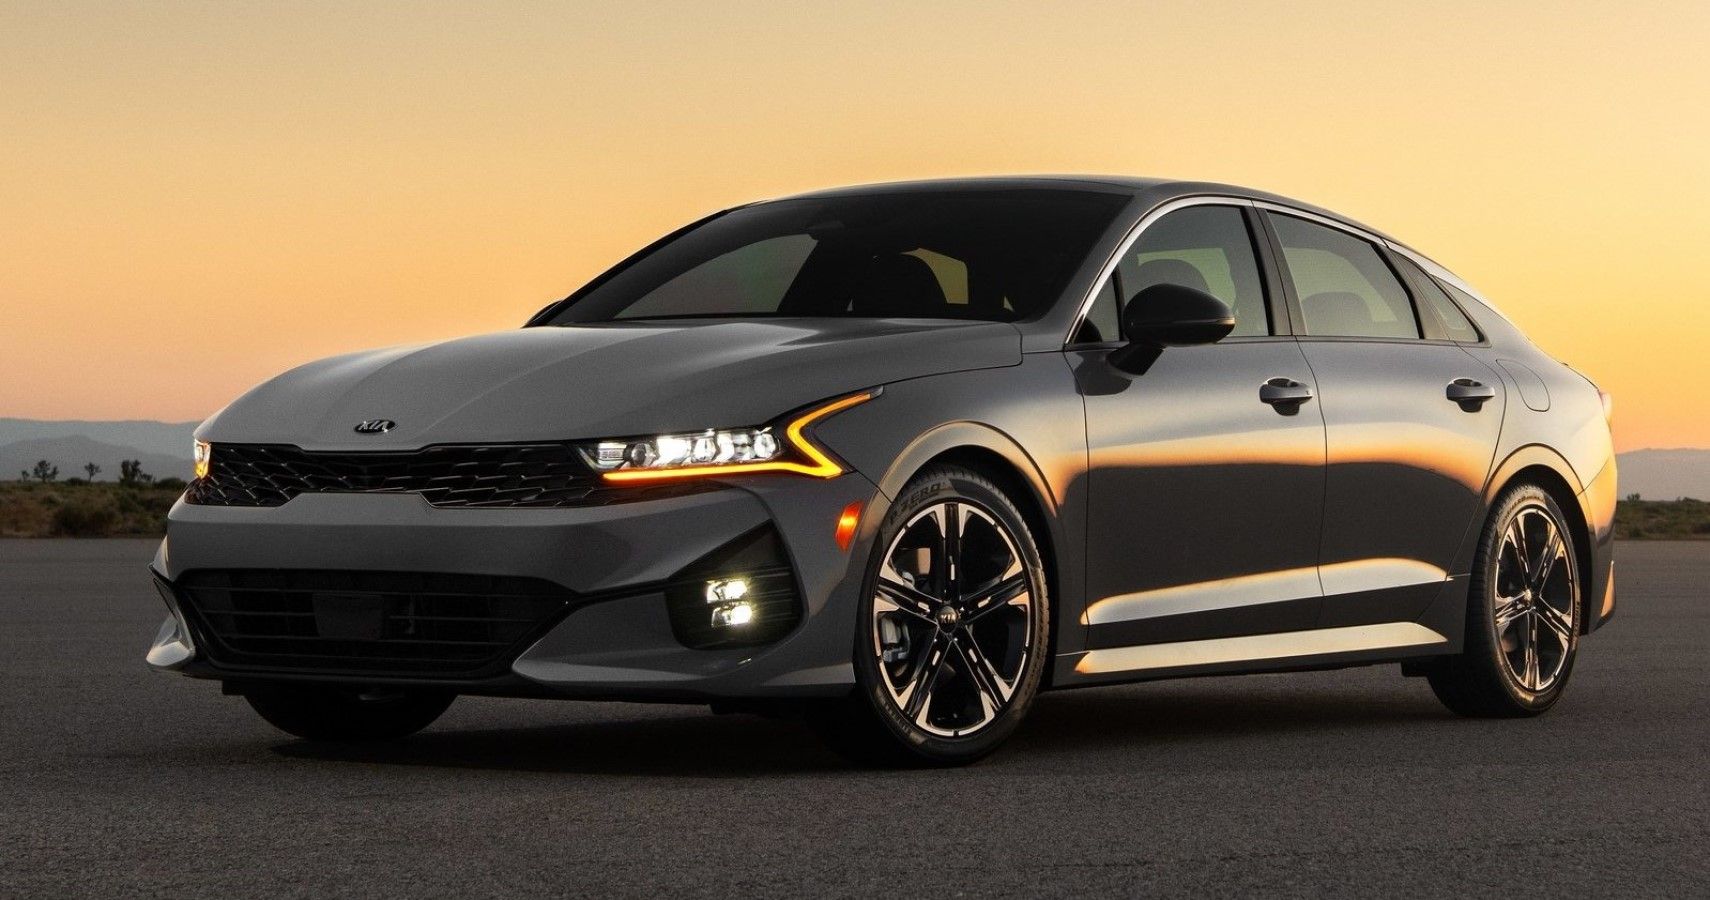 5 Sedans We'd Buy Over The New Kia K5 (5 That Don't Come Close)